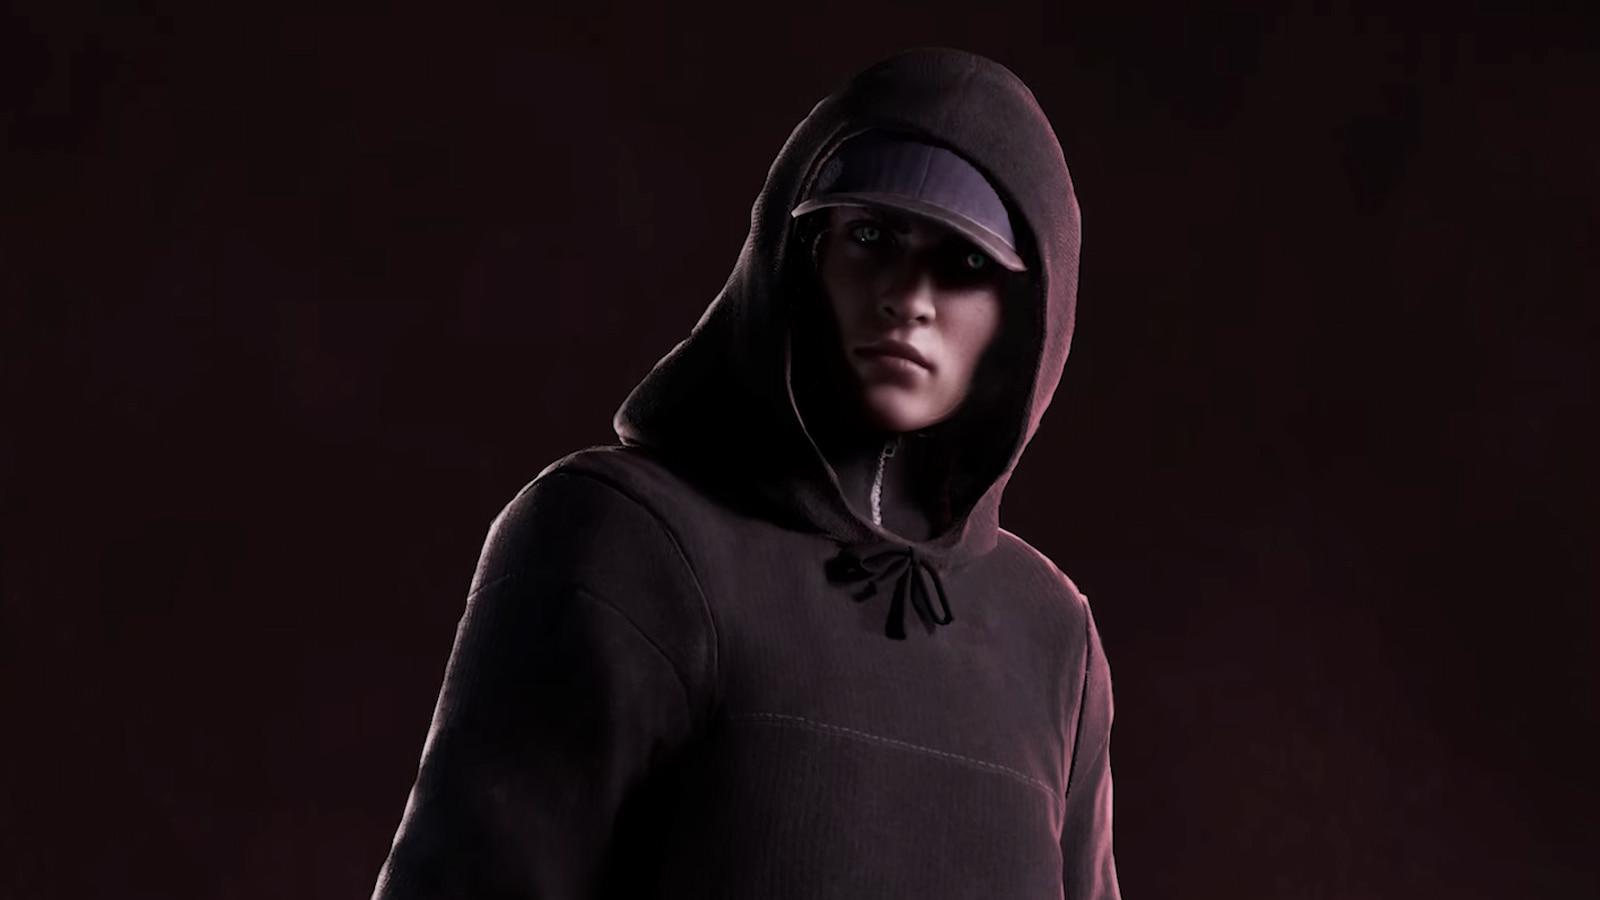 Phyre in a hoody from Vampire: The Masquerade Bloodlines 2